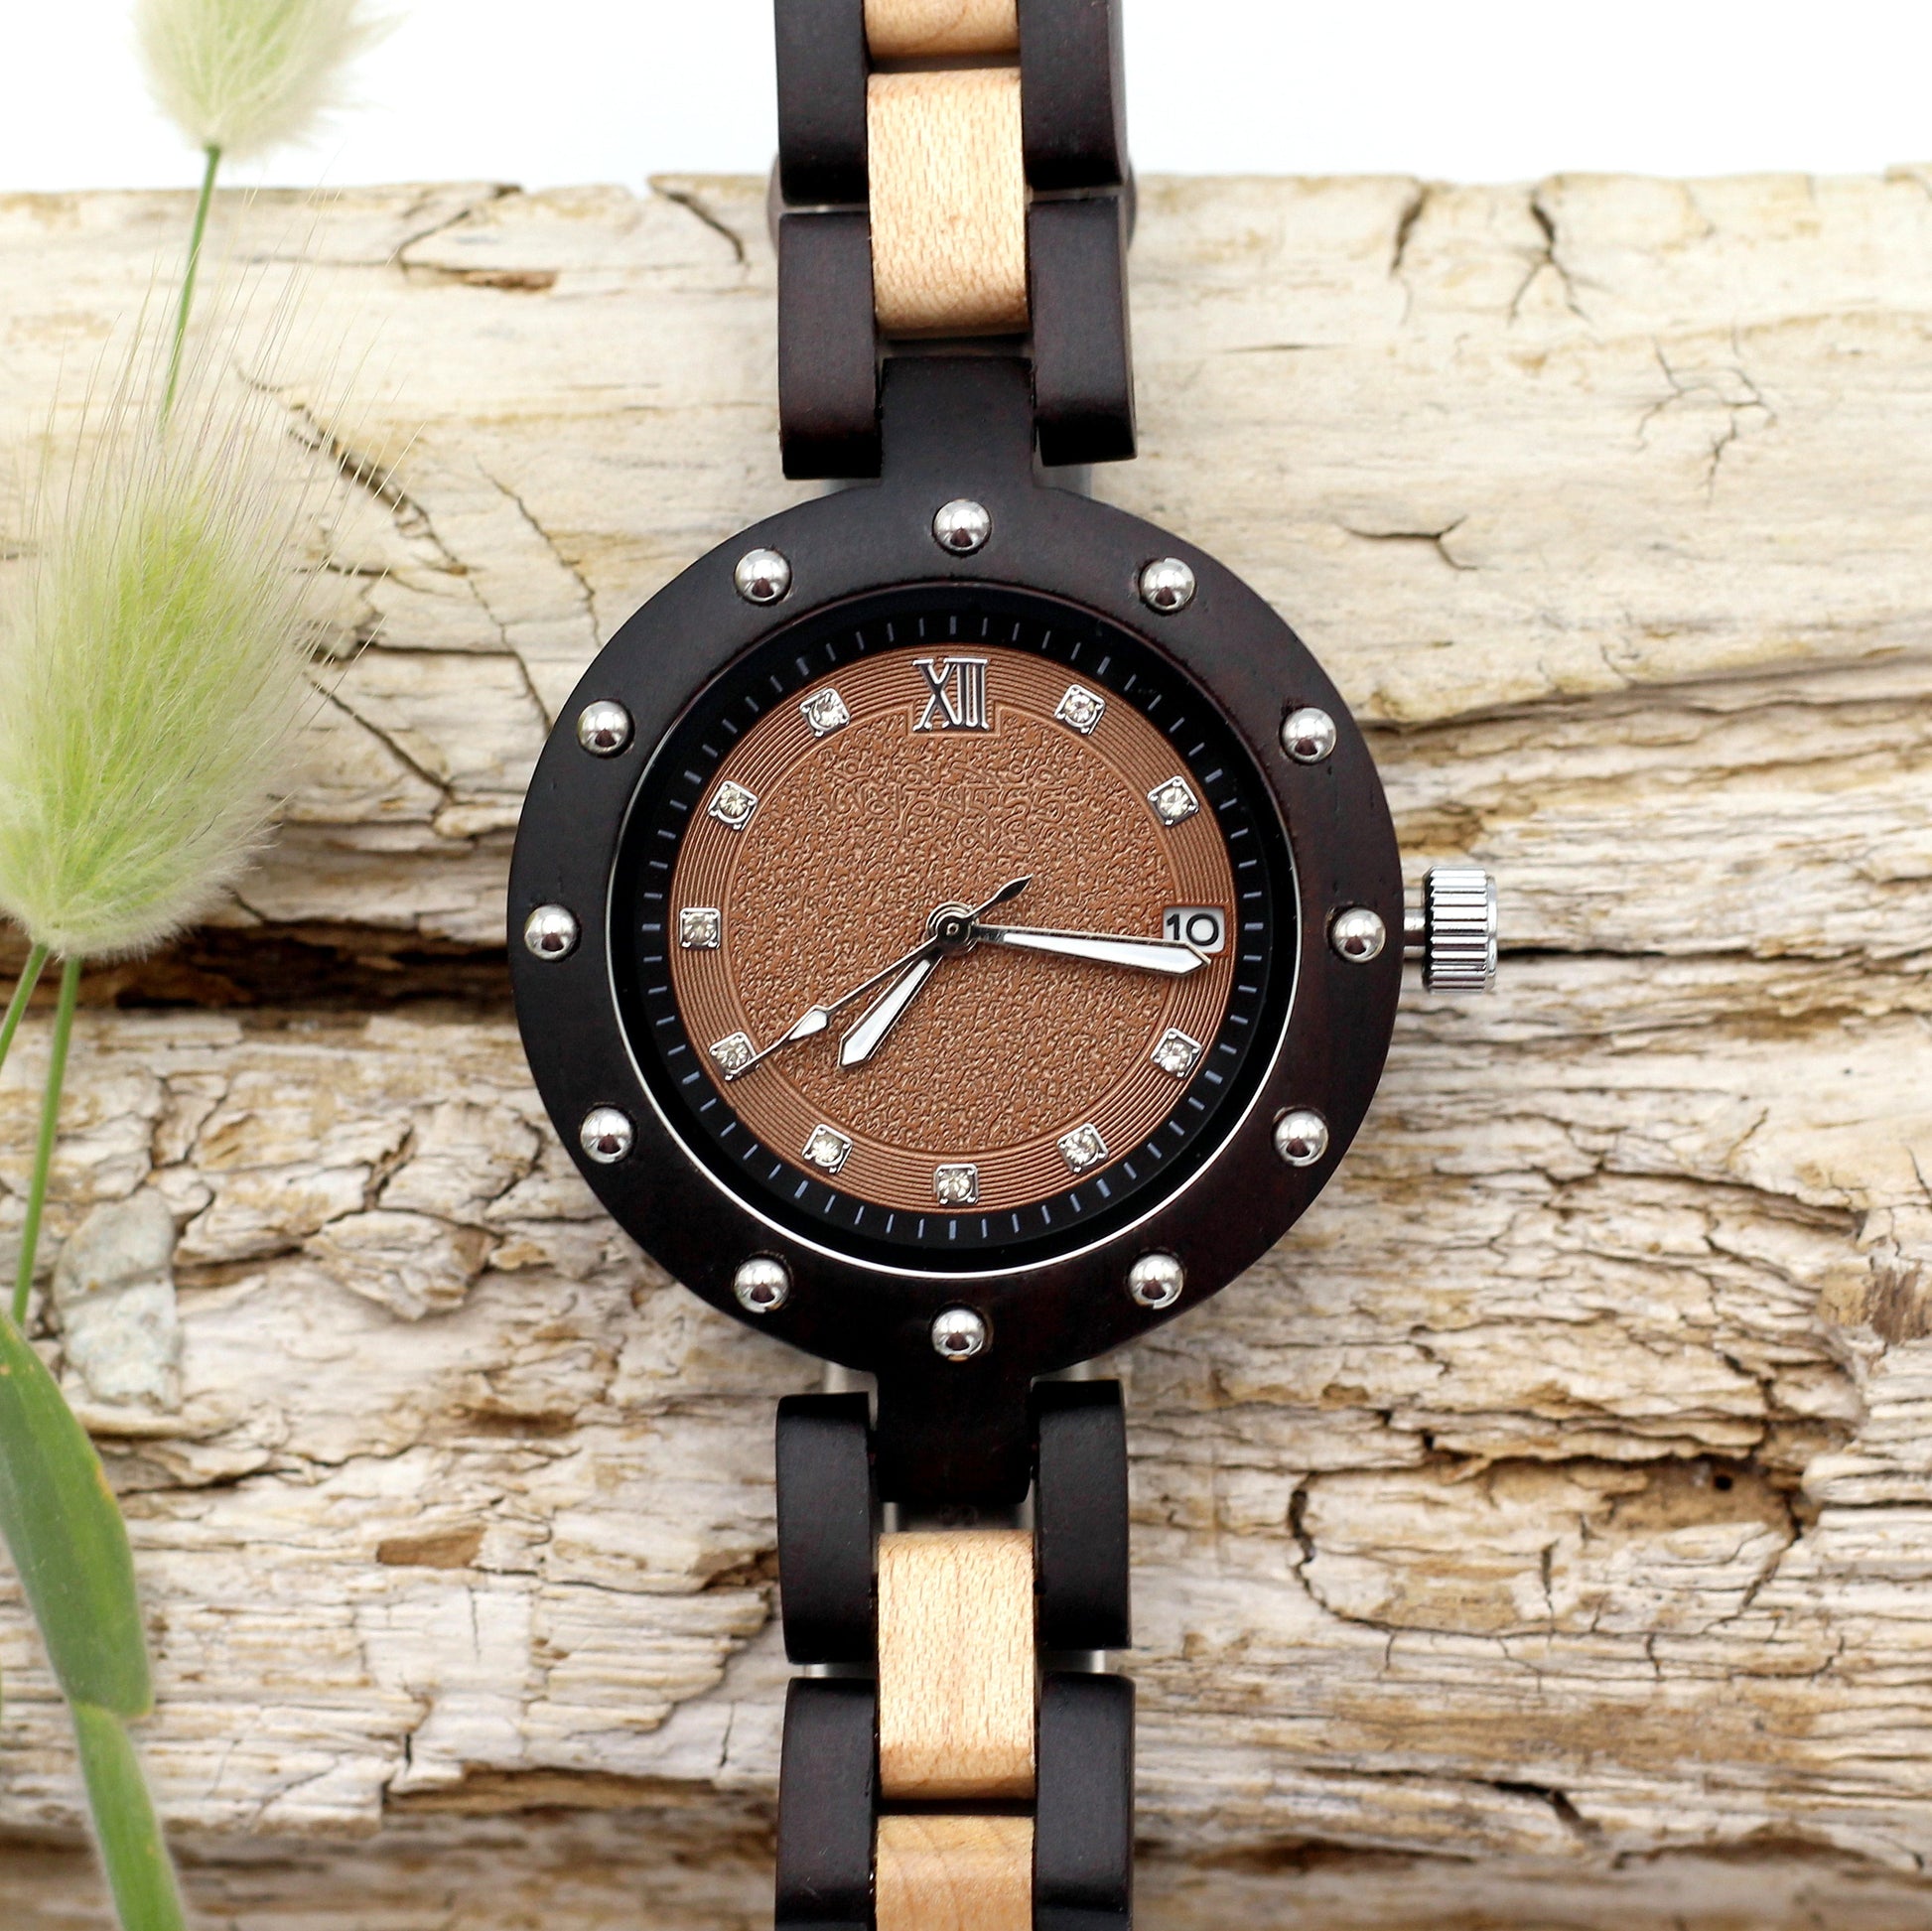 MISSDATE VERNE BLACK Ladies Solid Wooden Watch with DATE function - Hashtag Bamboo